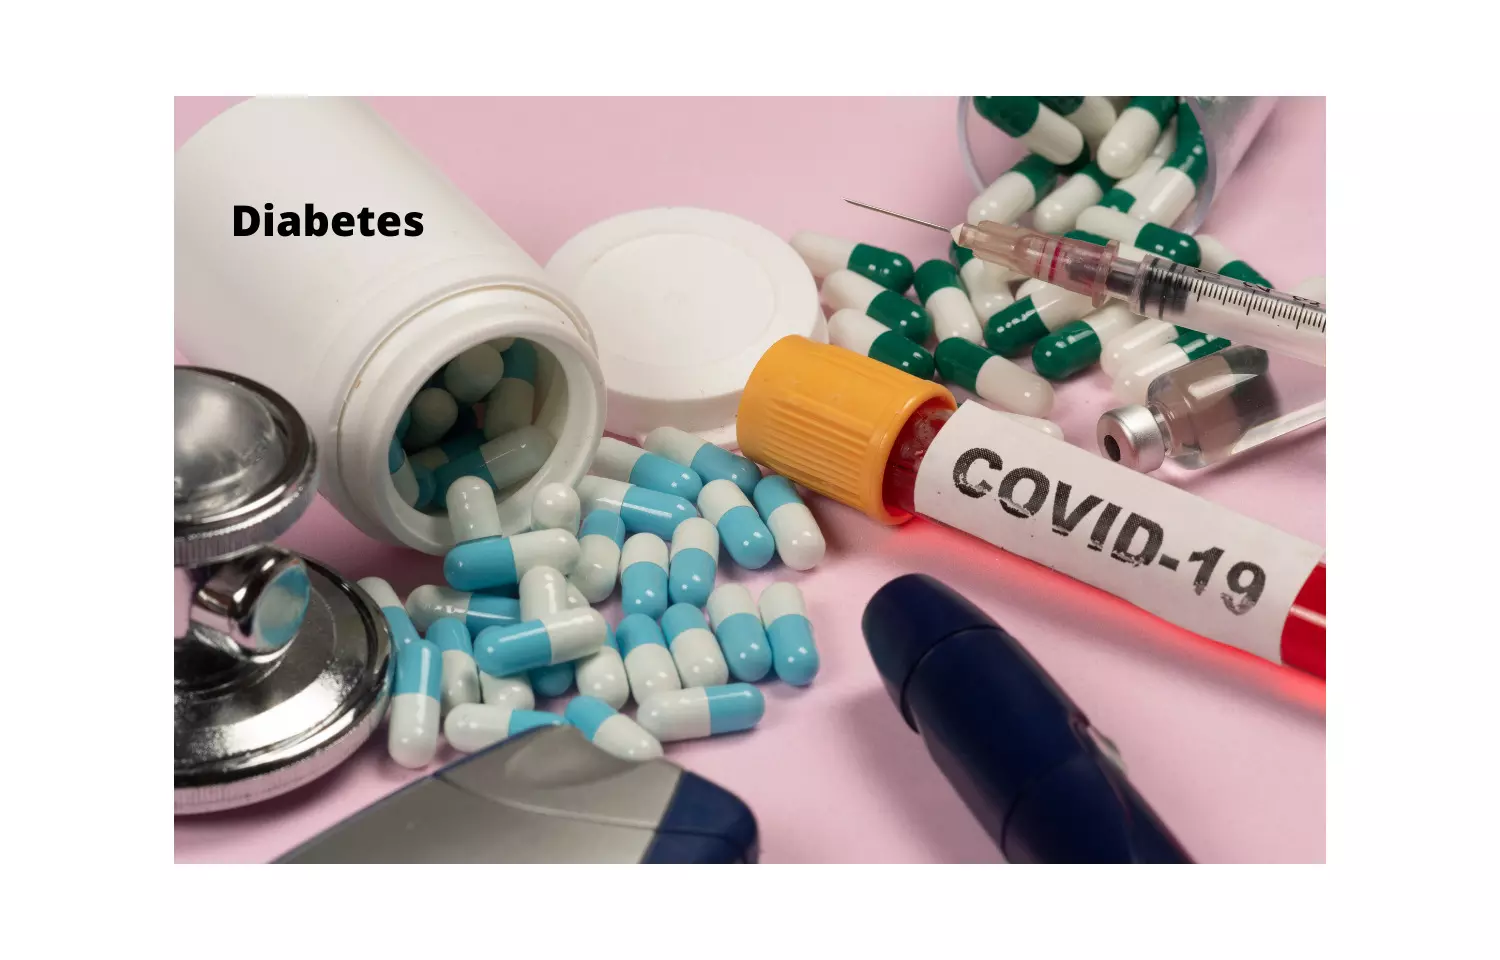 Covid-19 infection confers increased risk of diabetes after recovery